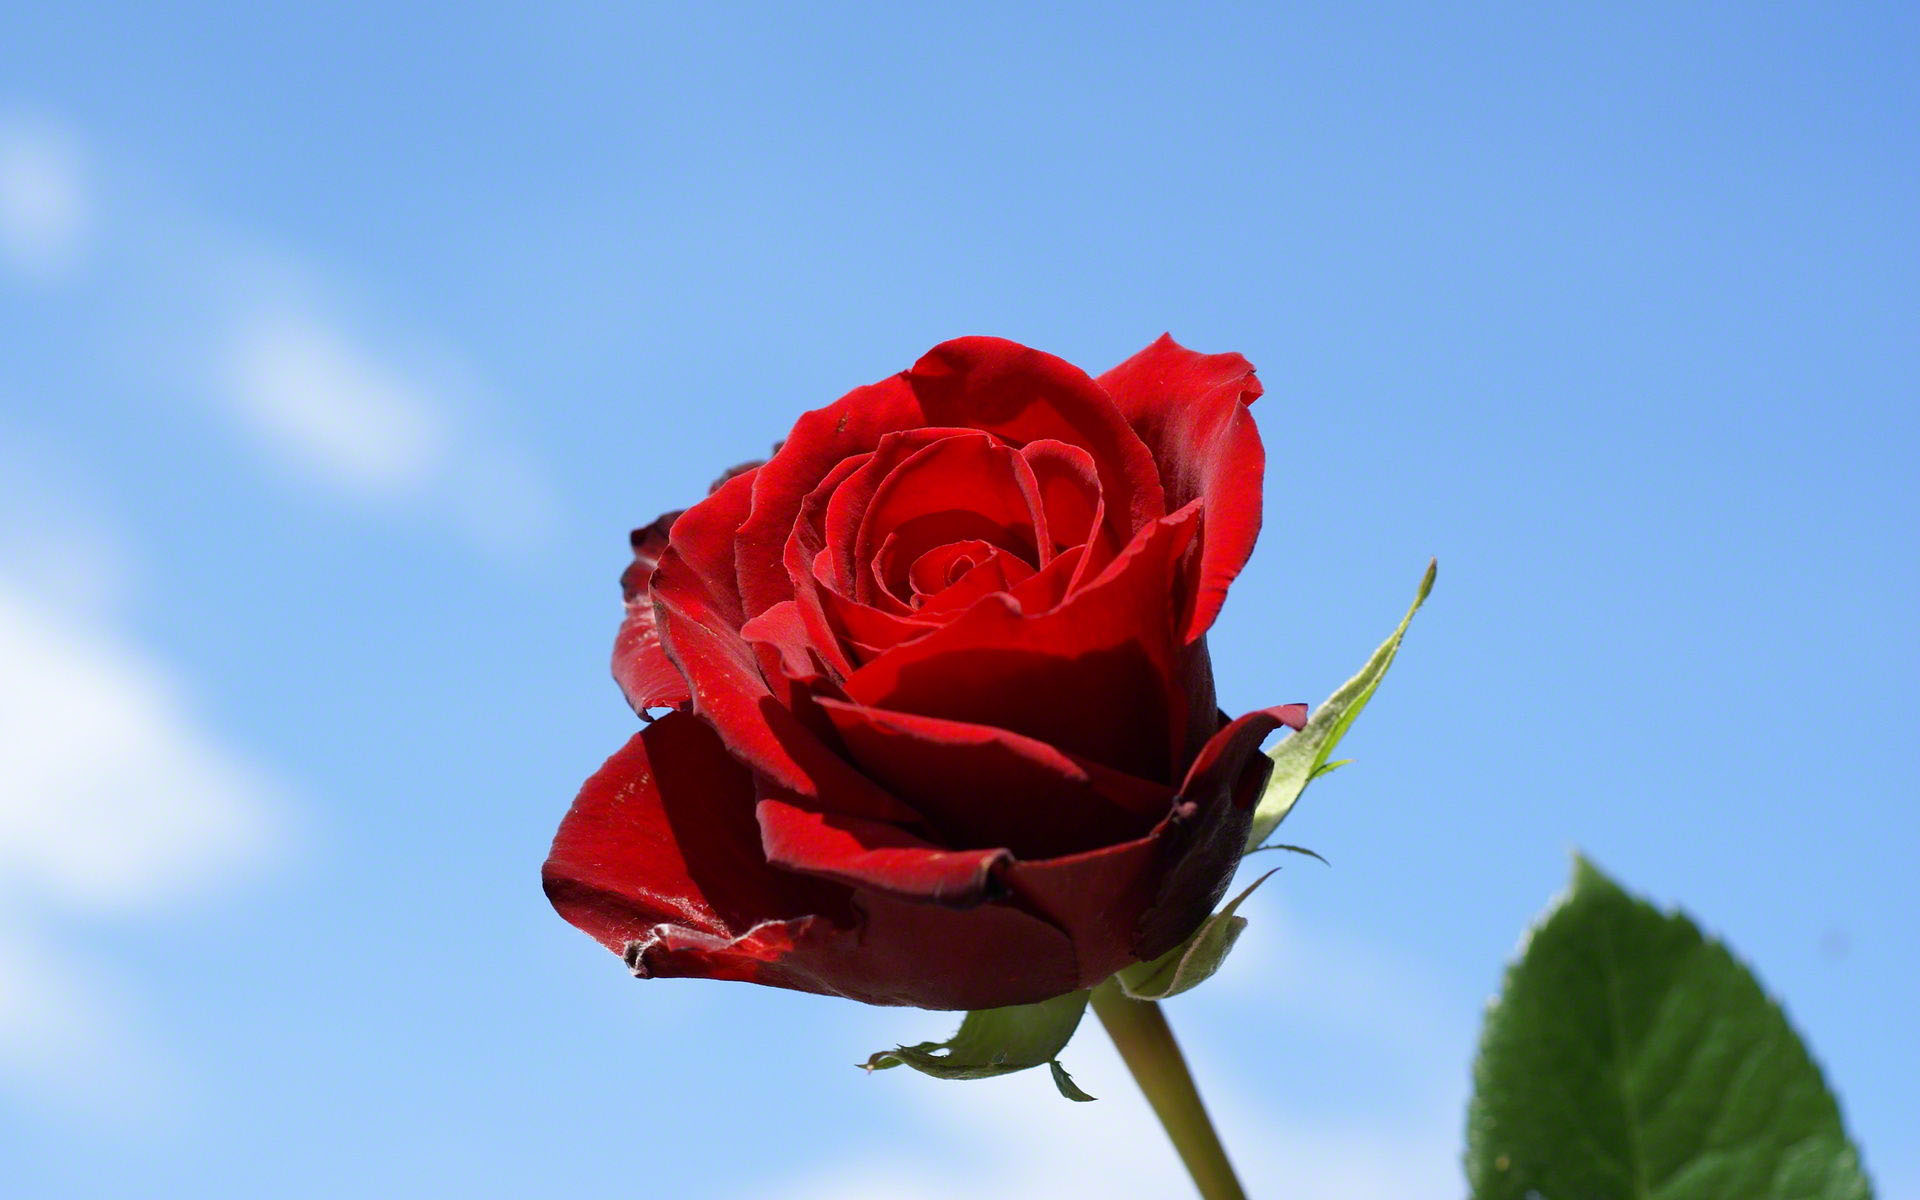 Single Rose With Blue Sky Background - Rose In The Sky - HD Wallpaper 